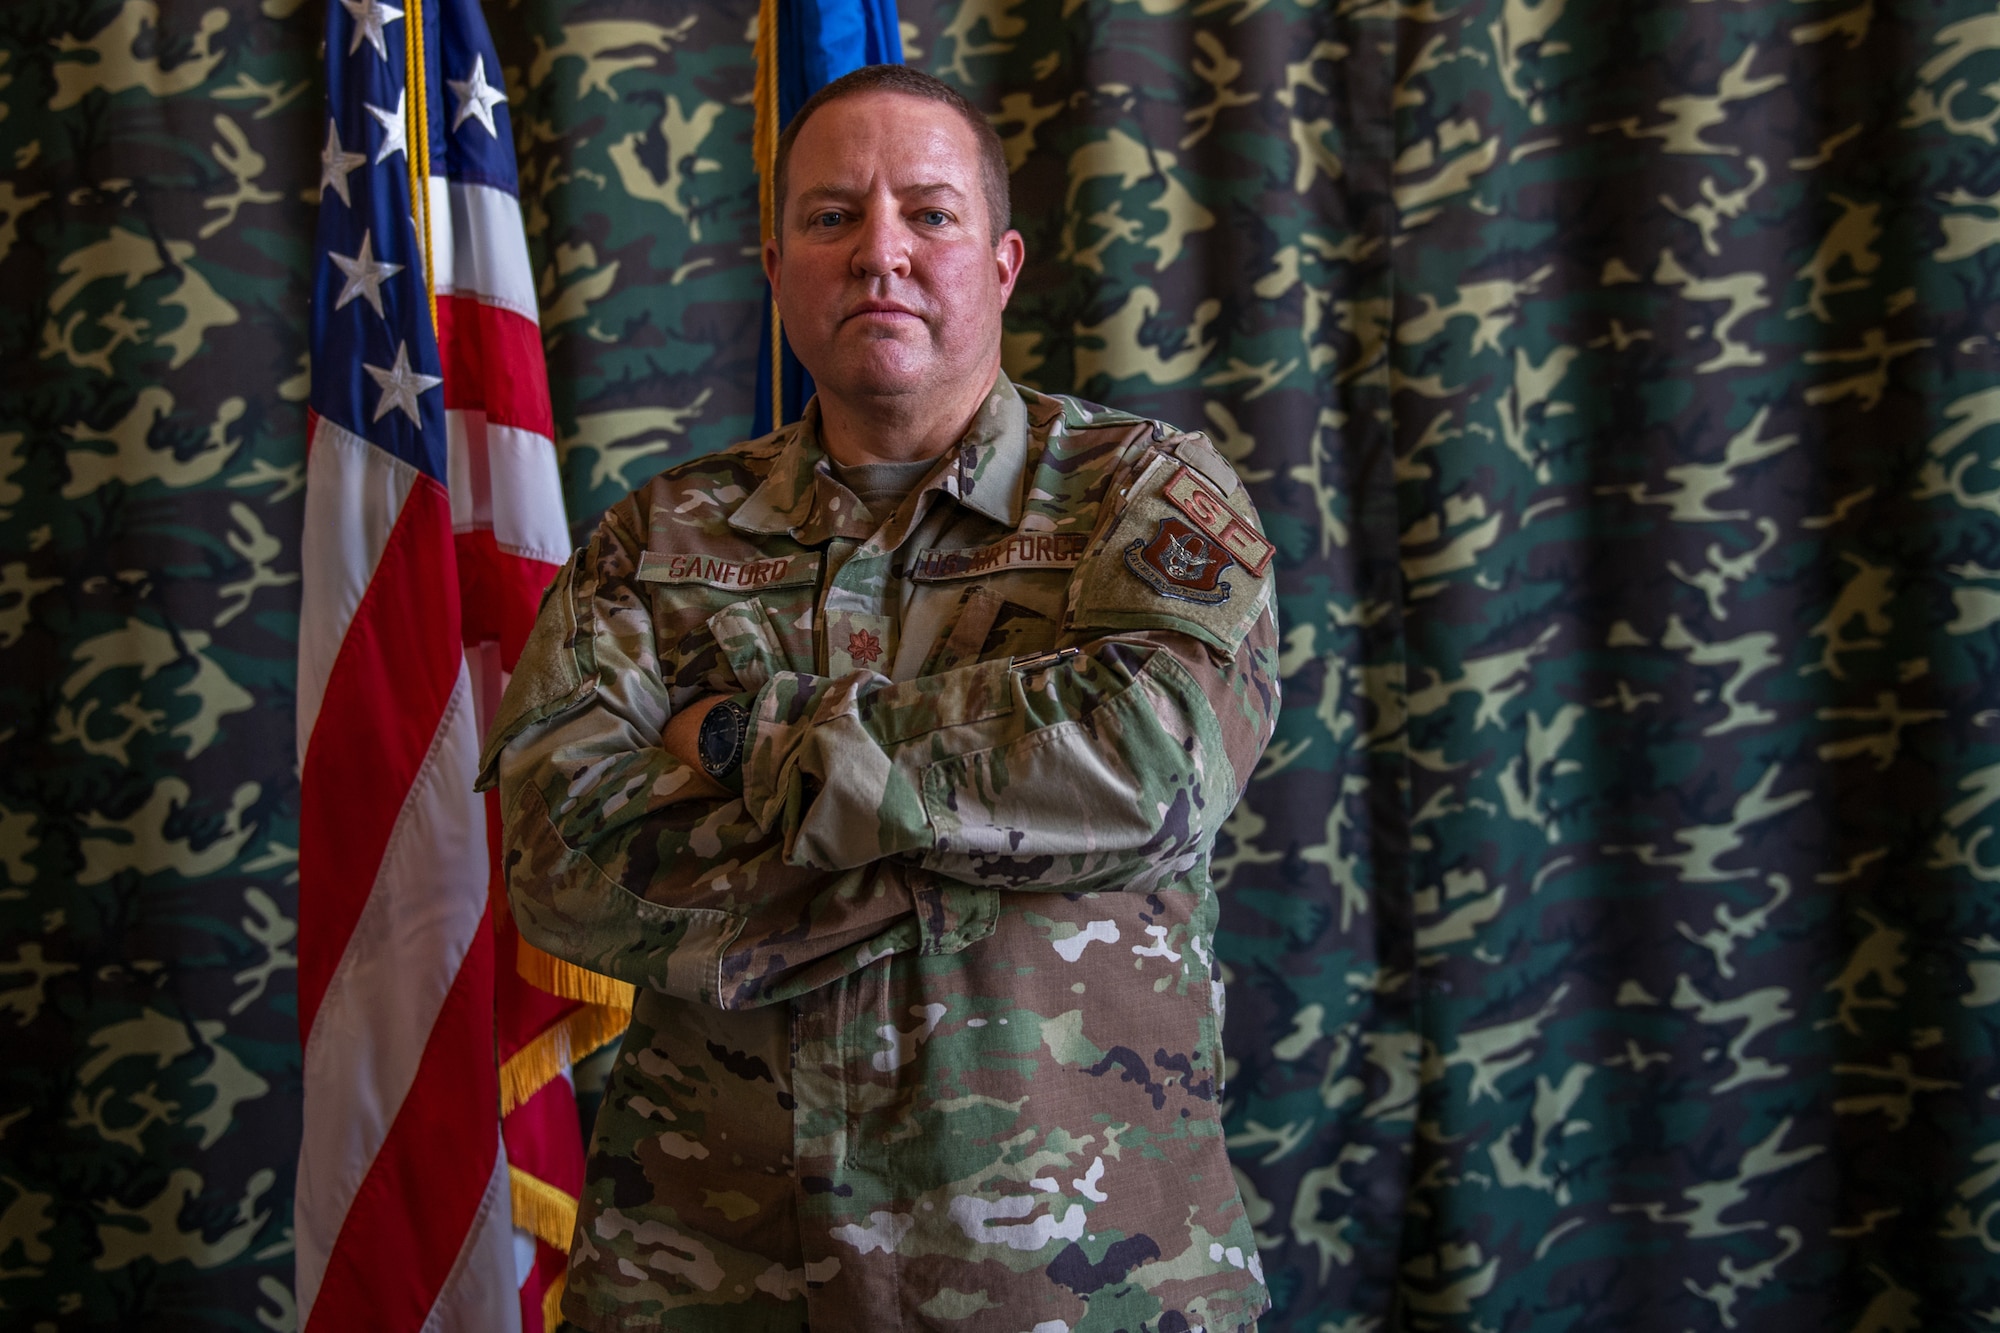 Maj. Robert Sanford, who serves part time as the 419th Security Forces Squadron commander at Hill Air Force Base, Utah, was recently appointed as a circuit court judge in Wyoming